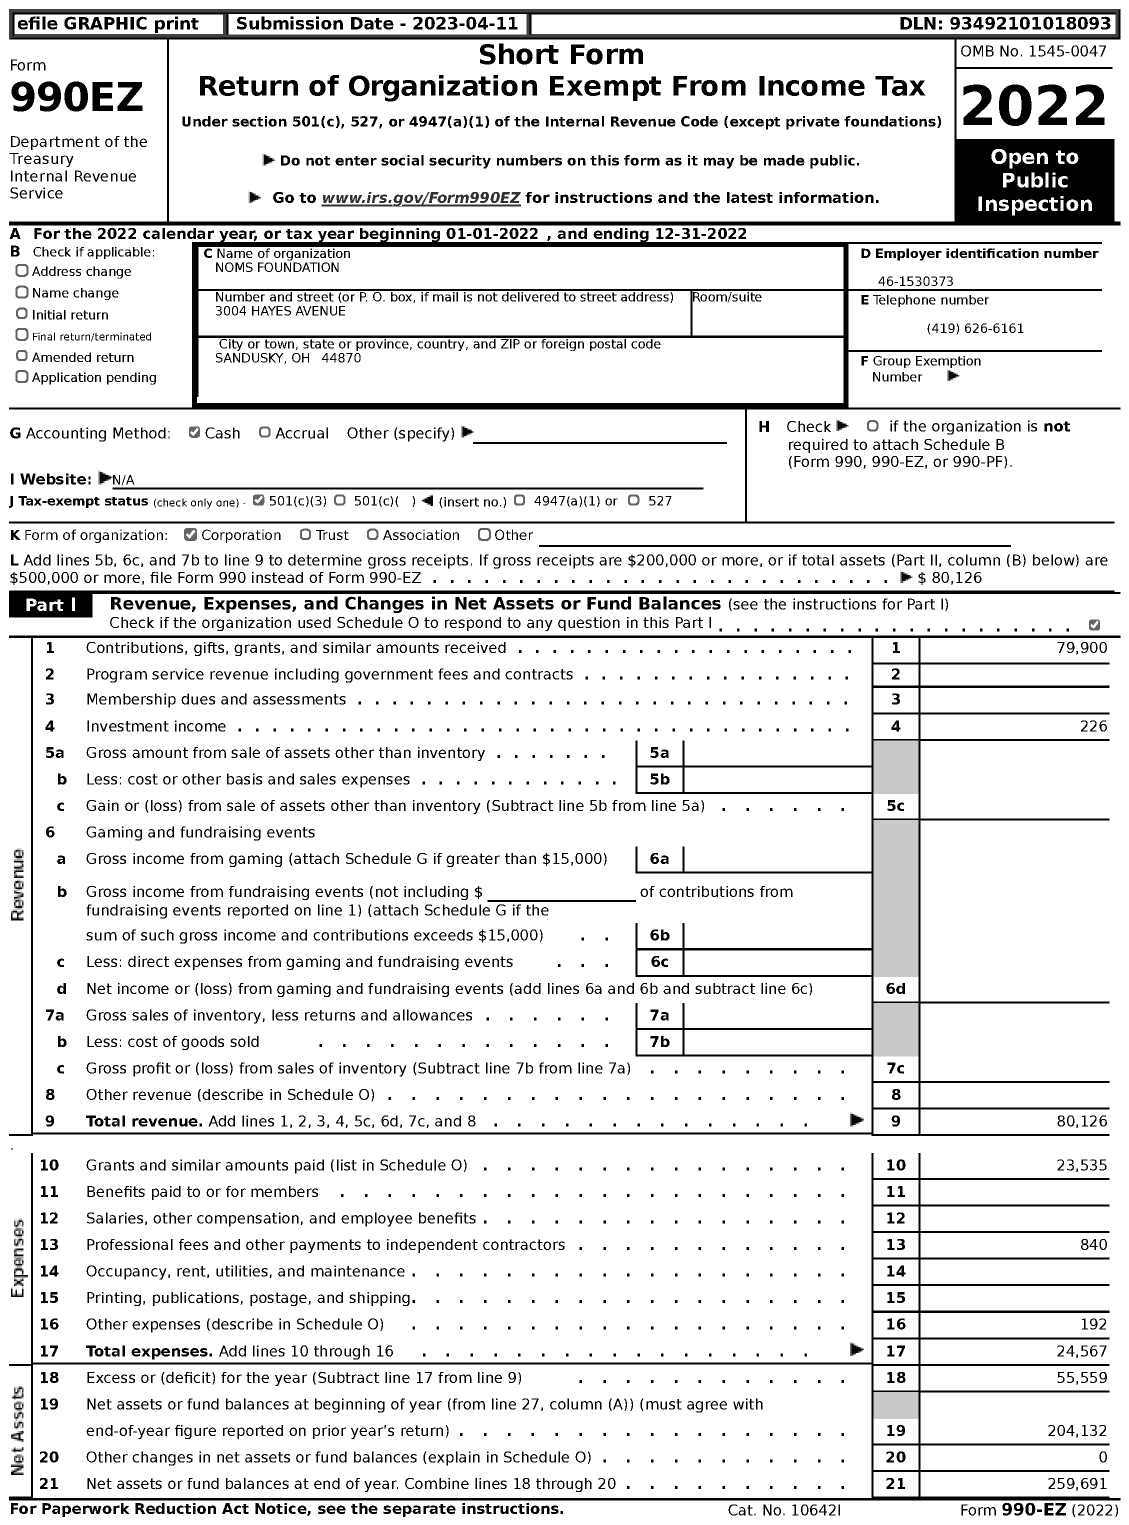 Image of first page of 2022 Form 990EZ for Noms Foundation